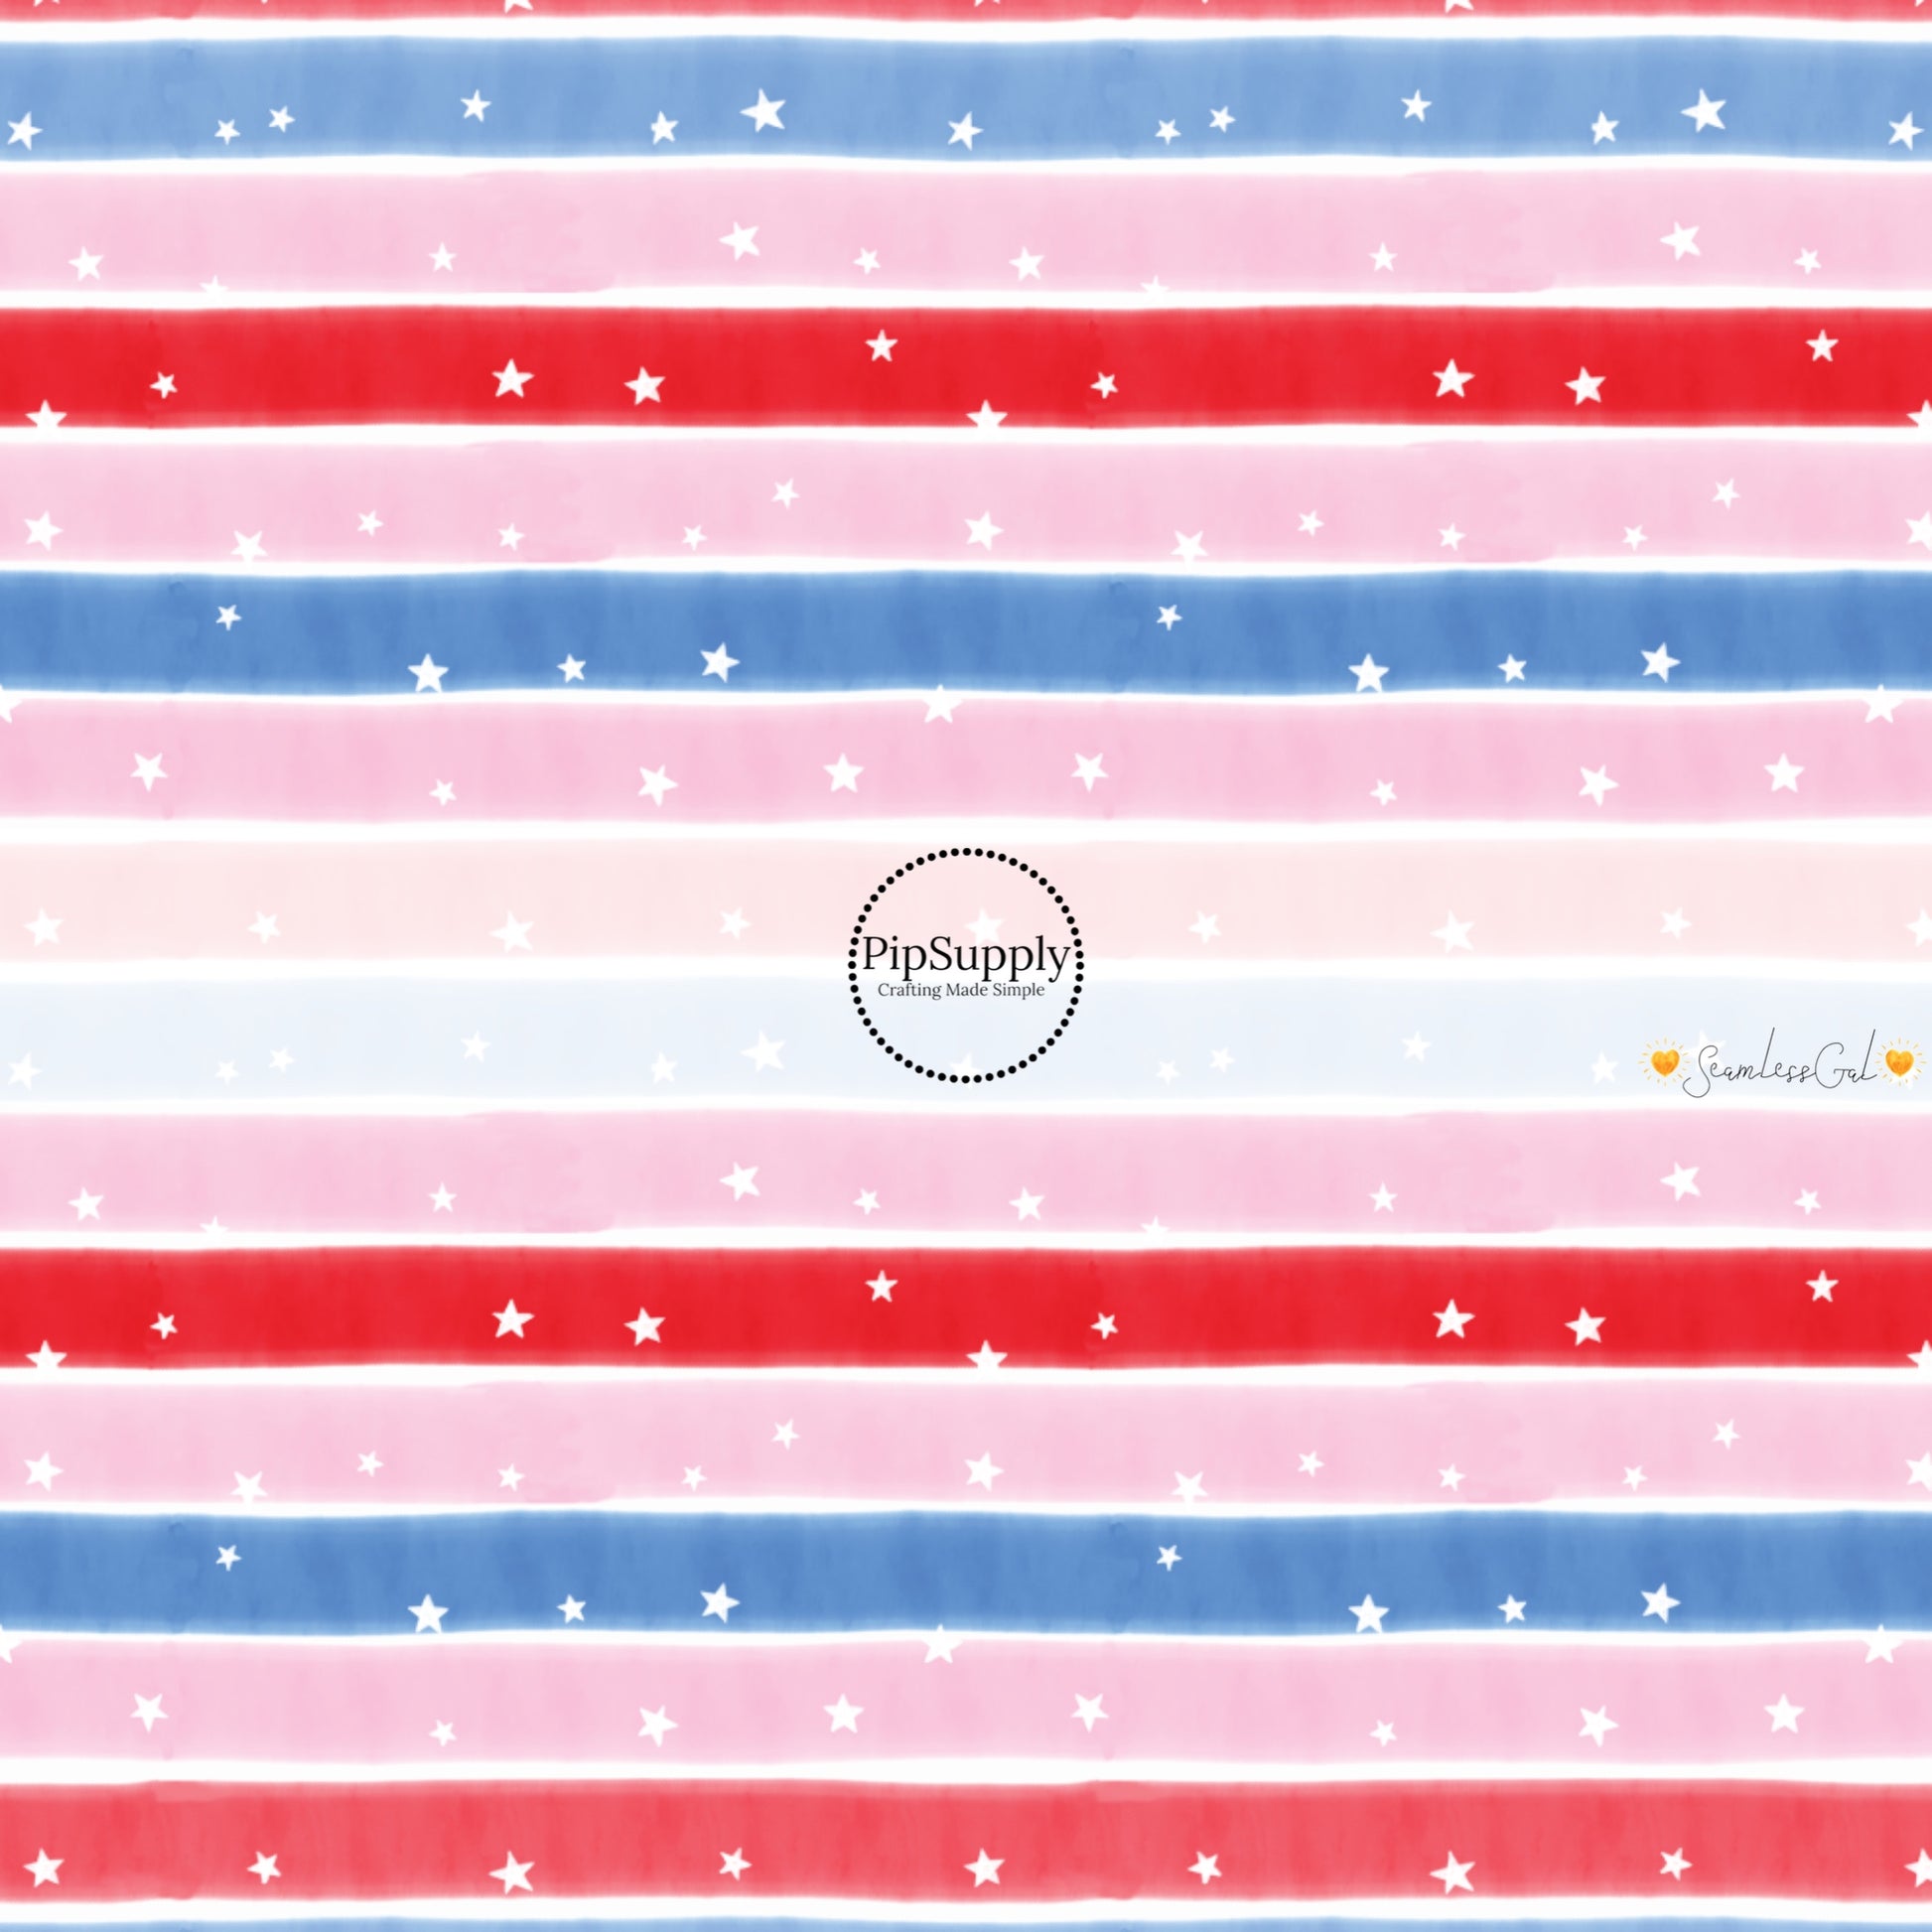 This 4th of July fabric by the yard features patriotic red, white, blue, and pink stripes with tiny white stars. This fun patriotic themed fabric can be used for all your sewing and crafting needs!